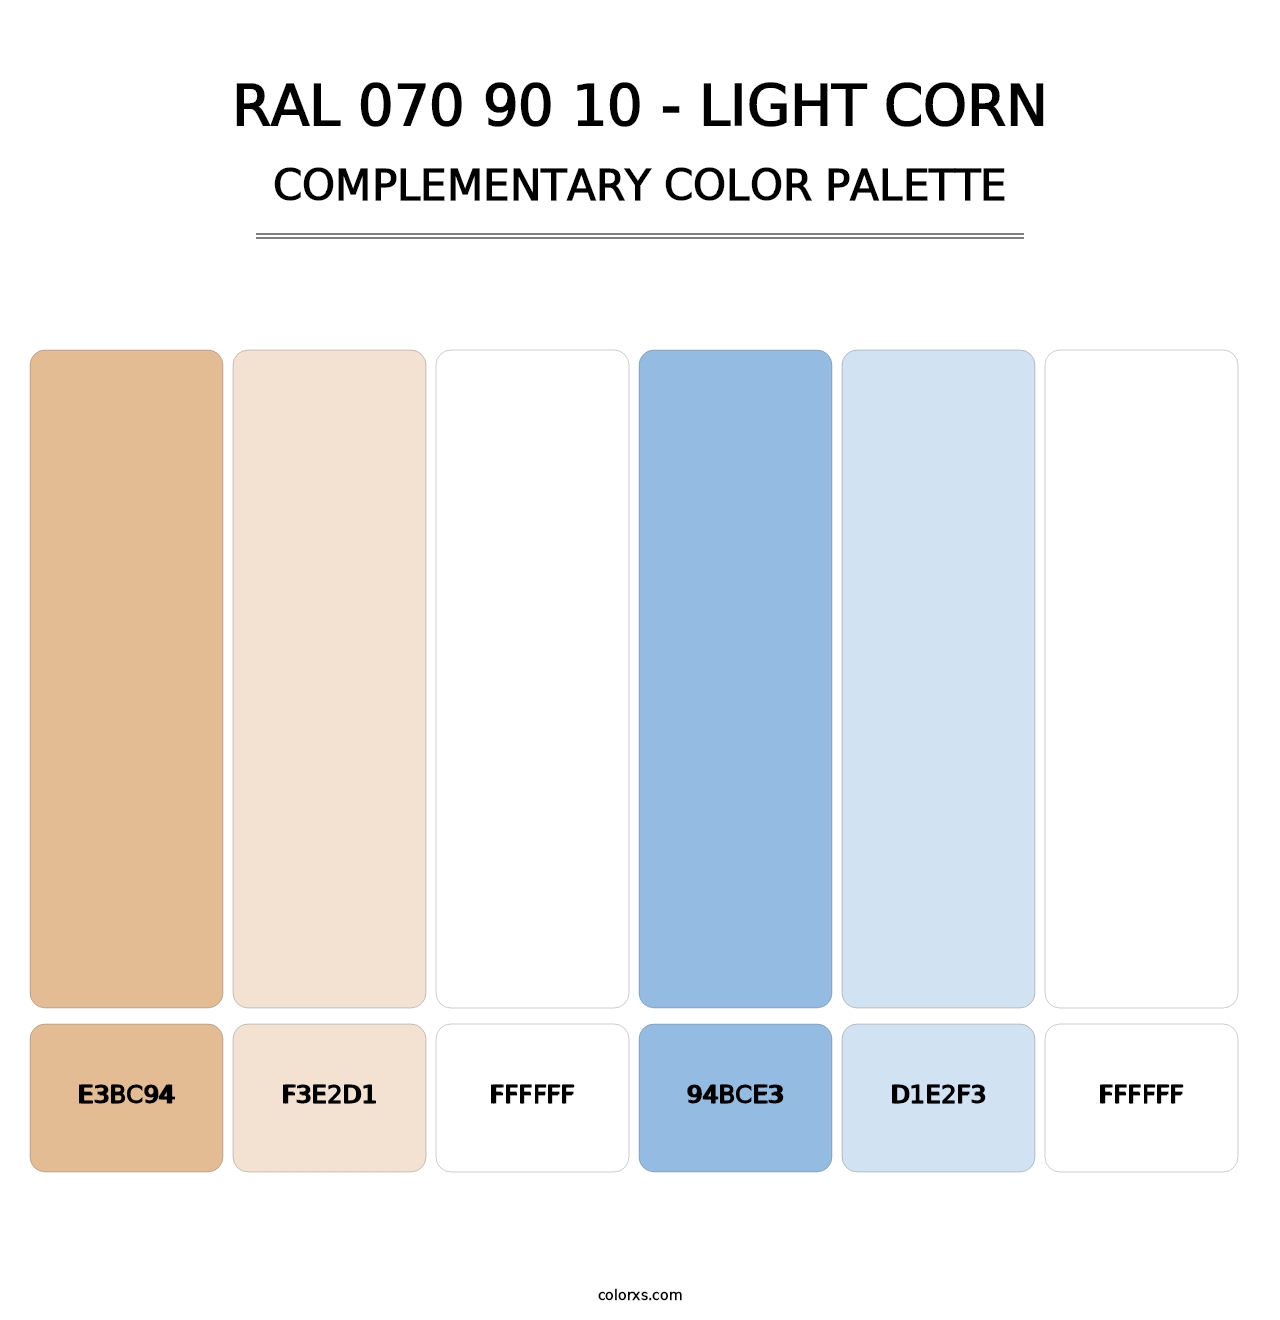 RAL 070 90 10 - Light Corn - Complementary Color Palette